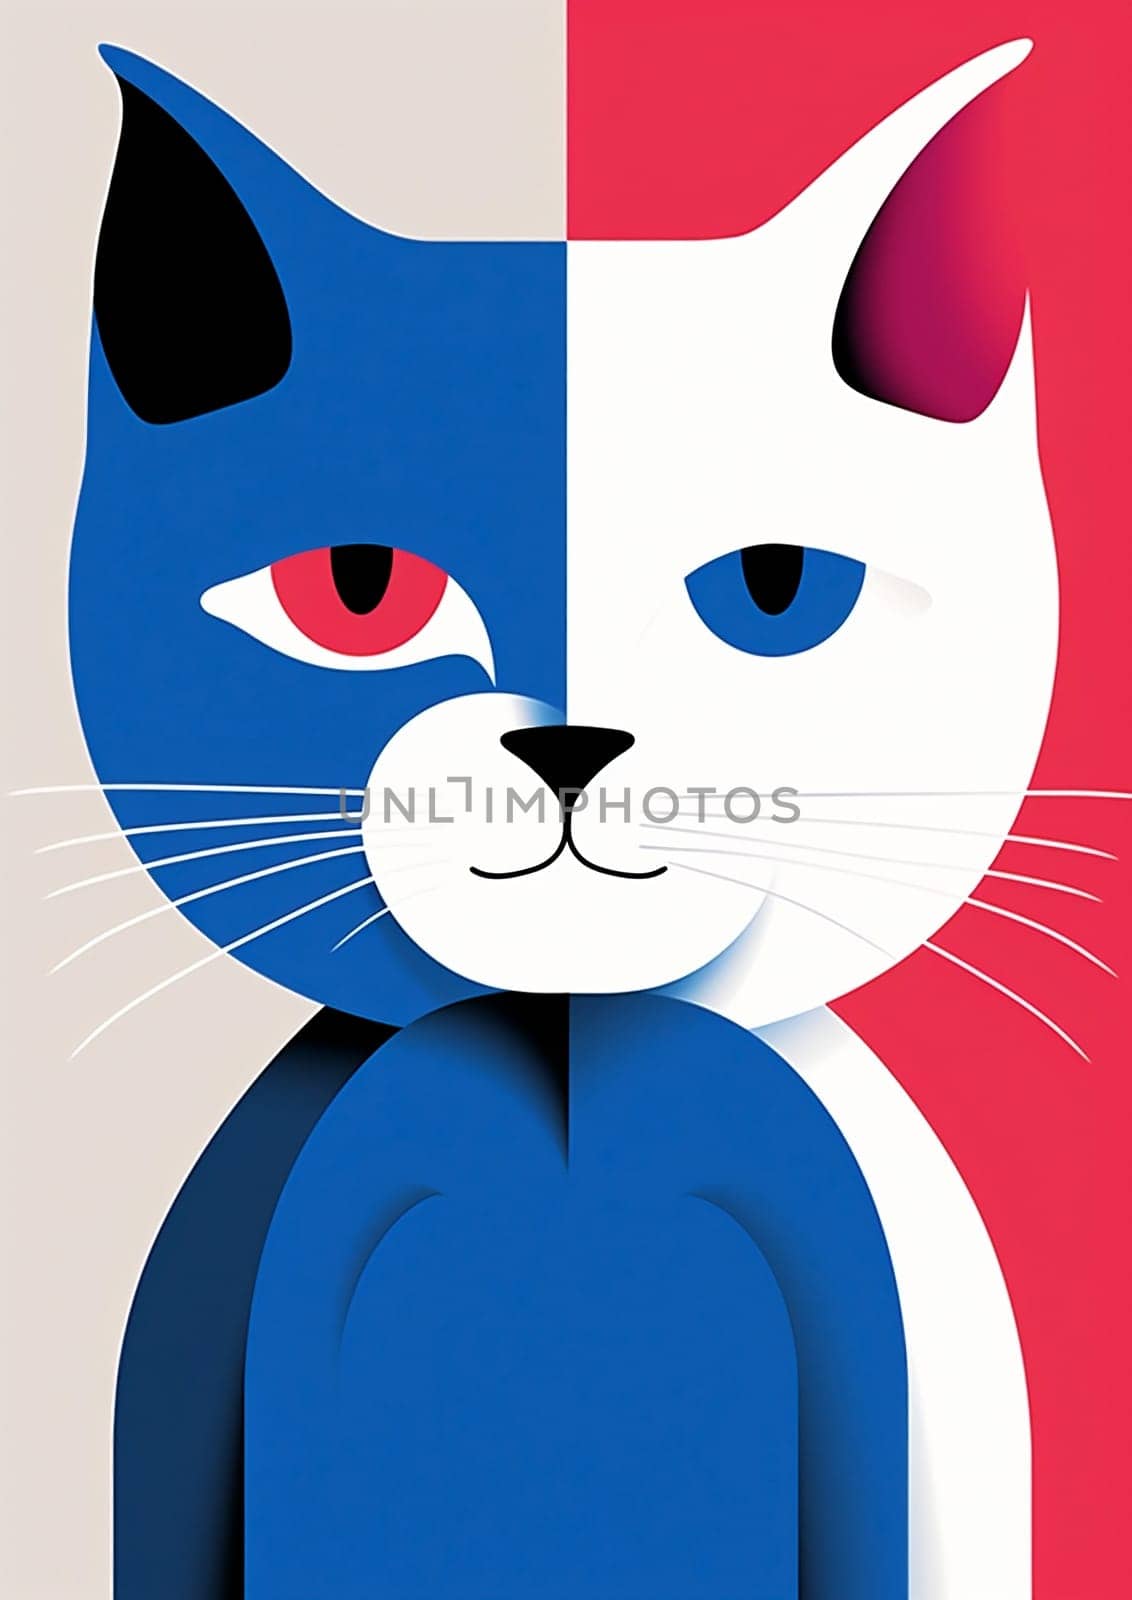 Pets design zoo background creative arts abstract head animal graphic kitten cartoon cute modern illustration style face nature cats poster icons portrait